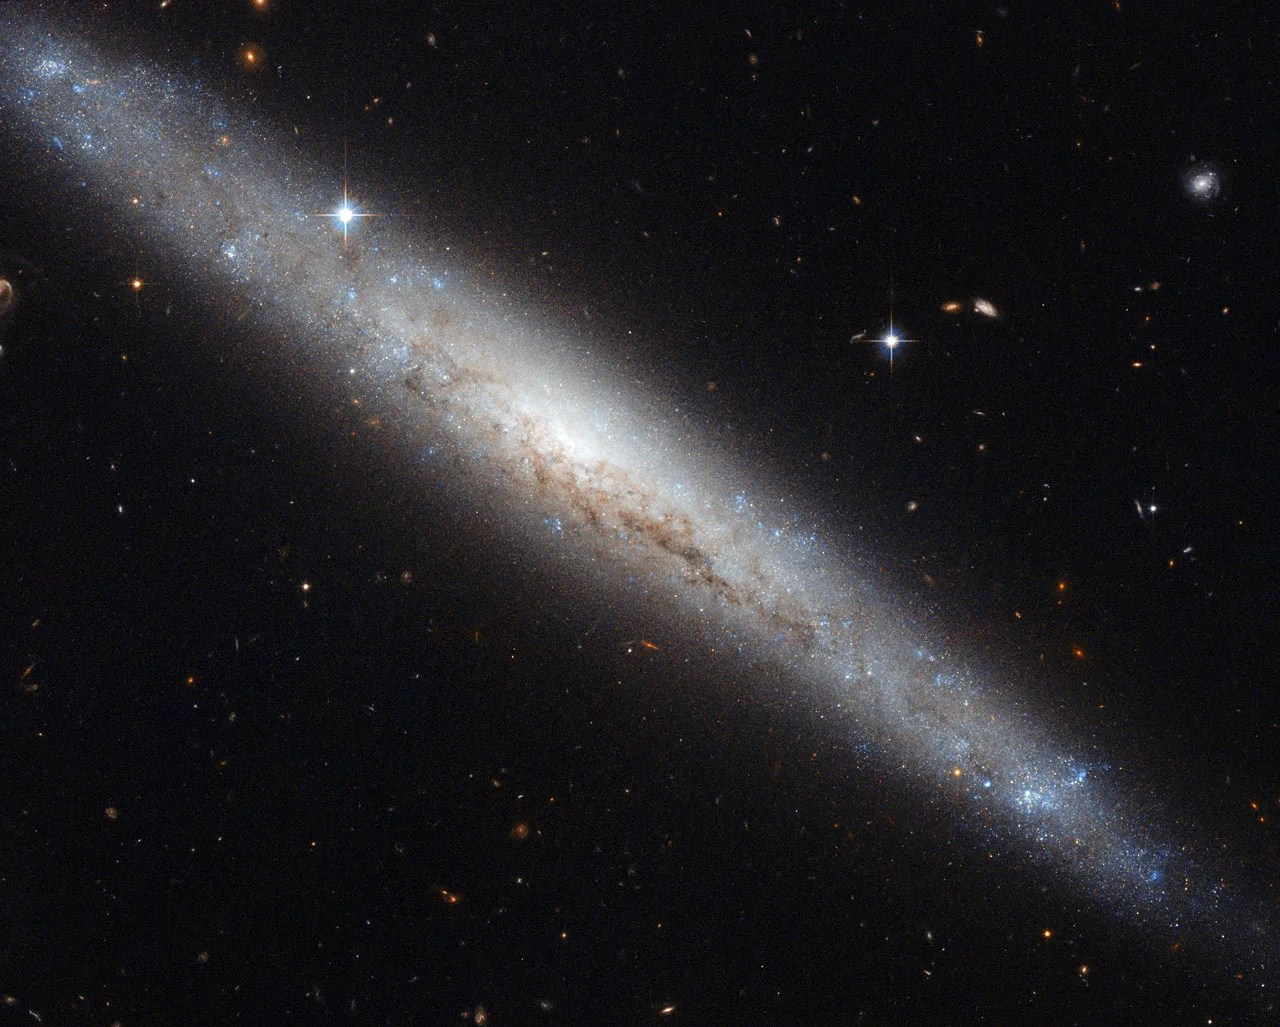 A fuzzy, edge-on spiral galaxy bend sinister with dust lanes lacing the thickest part